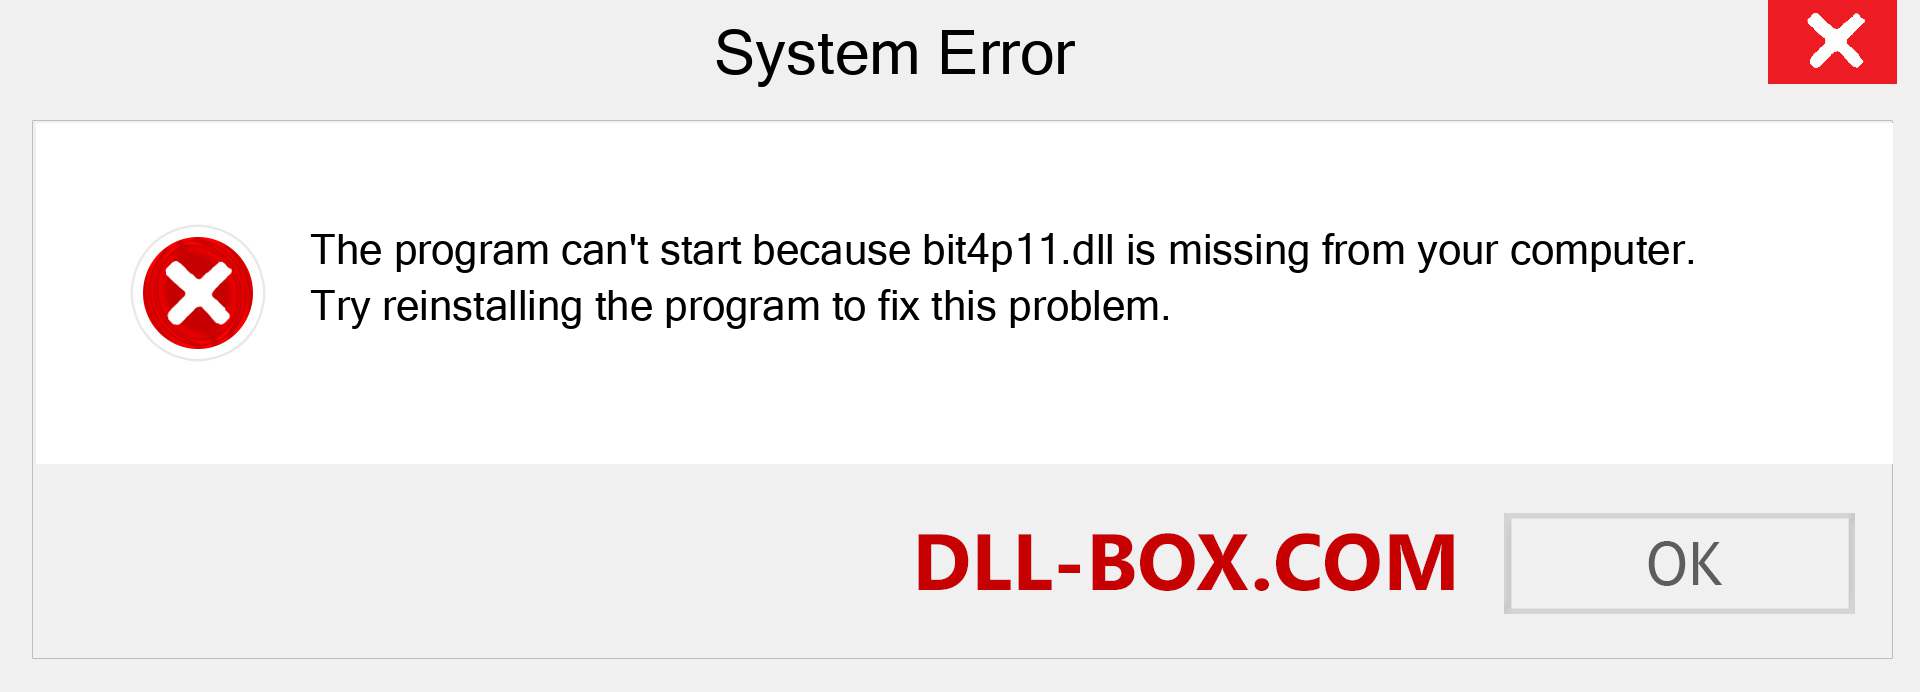  bit4p11.dll file is missing?. Download for Windows 7, 8, 10 - Fix  bit4p11 dll Missing Error on Windows, photos, images